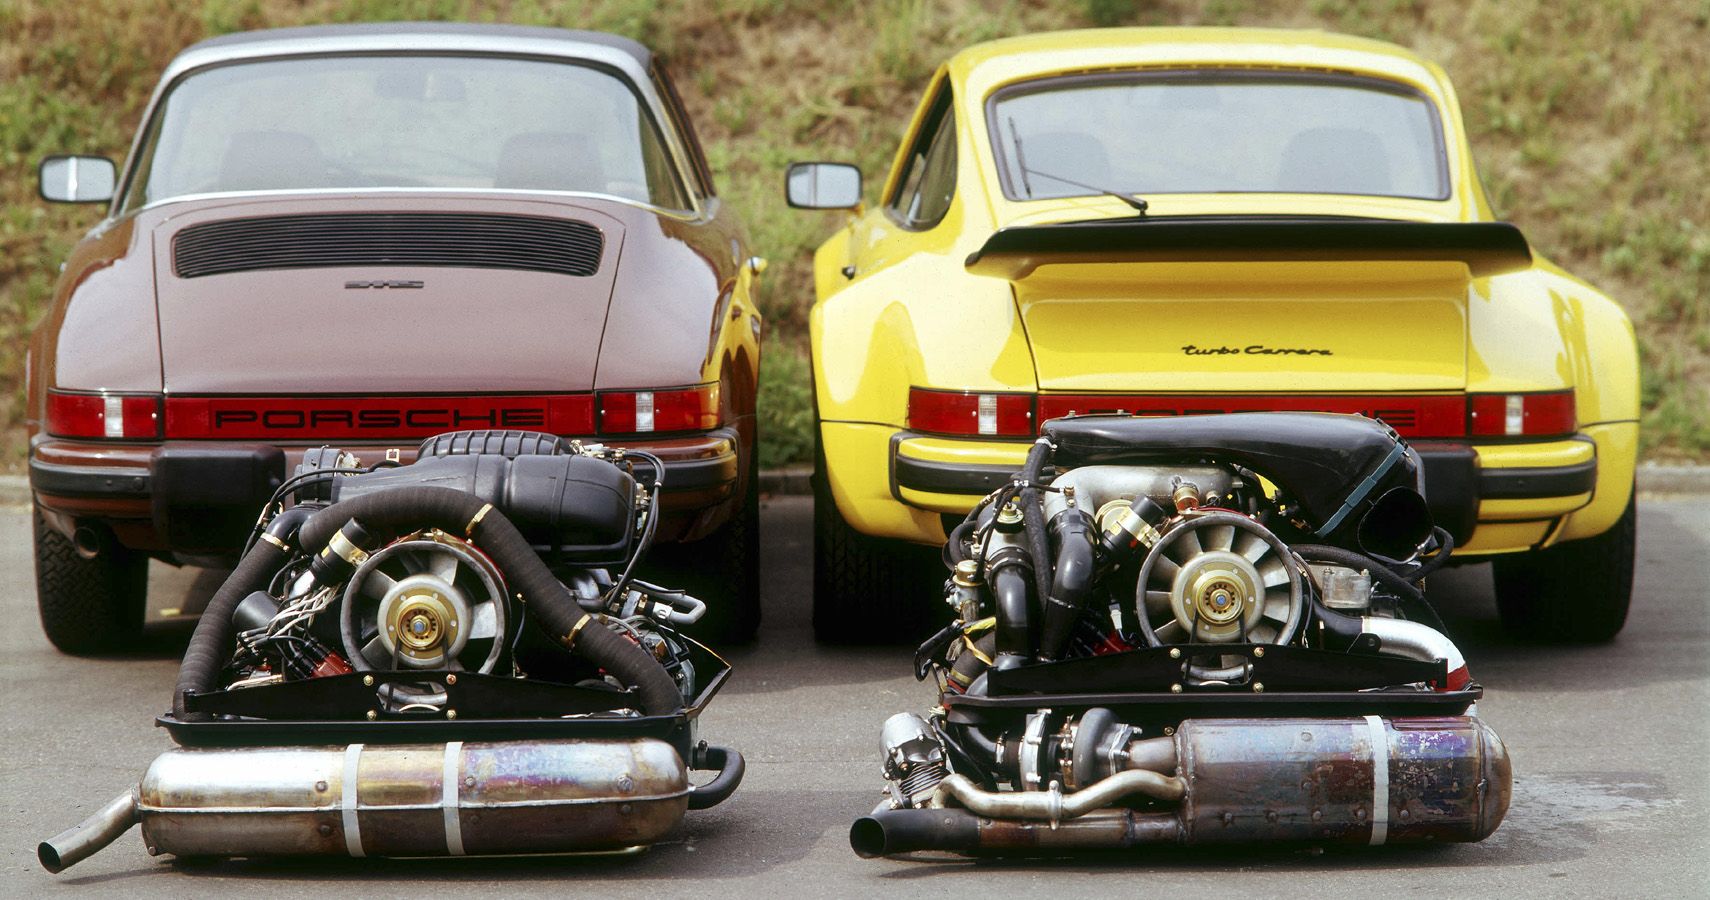 The Classic Porsche 911 S 2.7 Targa (links) and 911 Turbo 3.0 (G-Modell) 1976 With Turbochargers